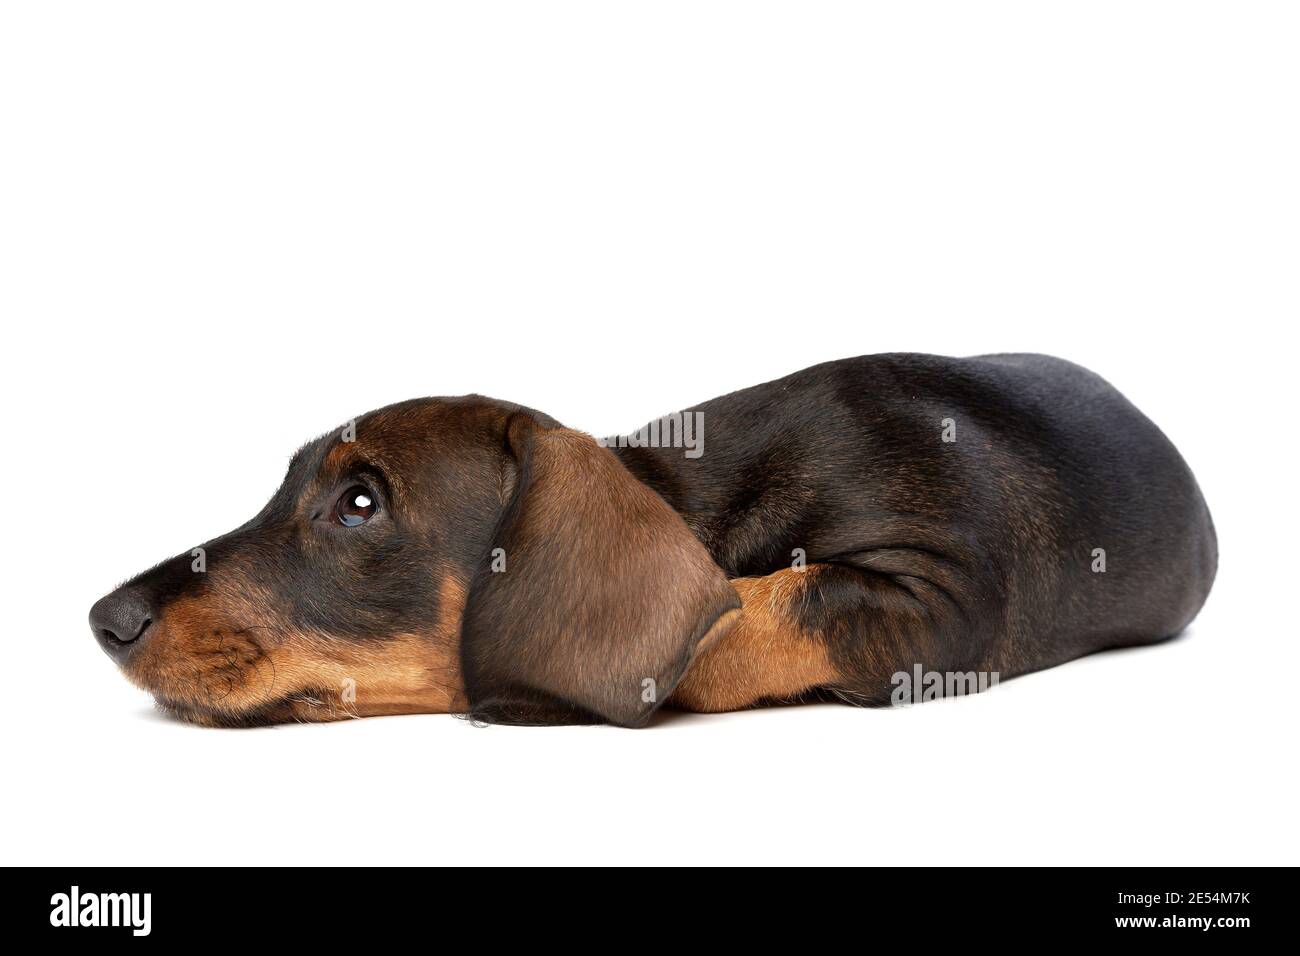 black and tan wire haired dachshund puppy in front of a white background Stock Photo